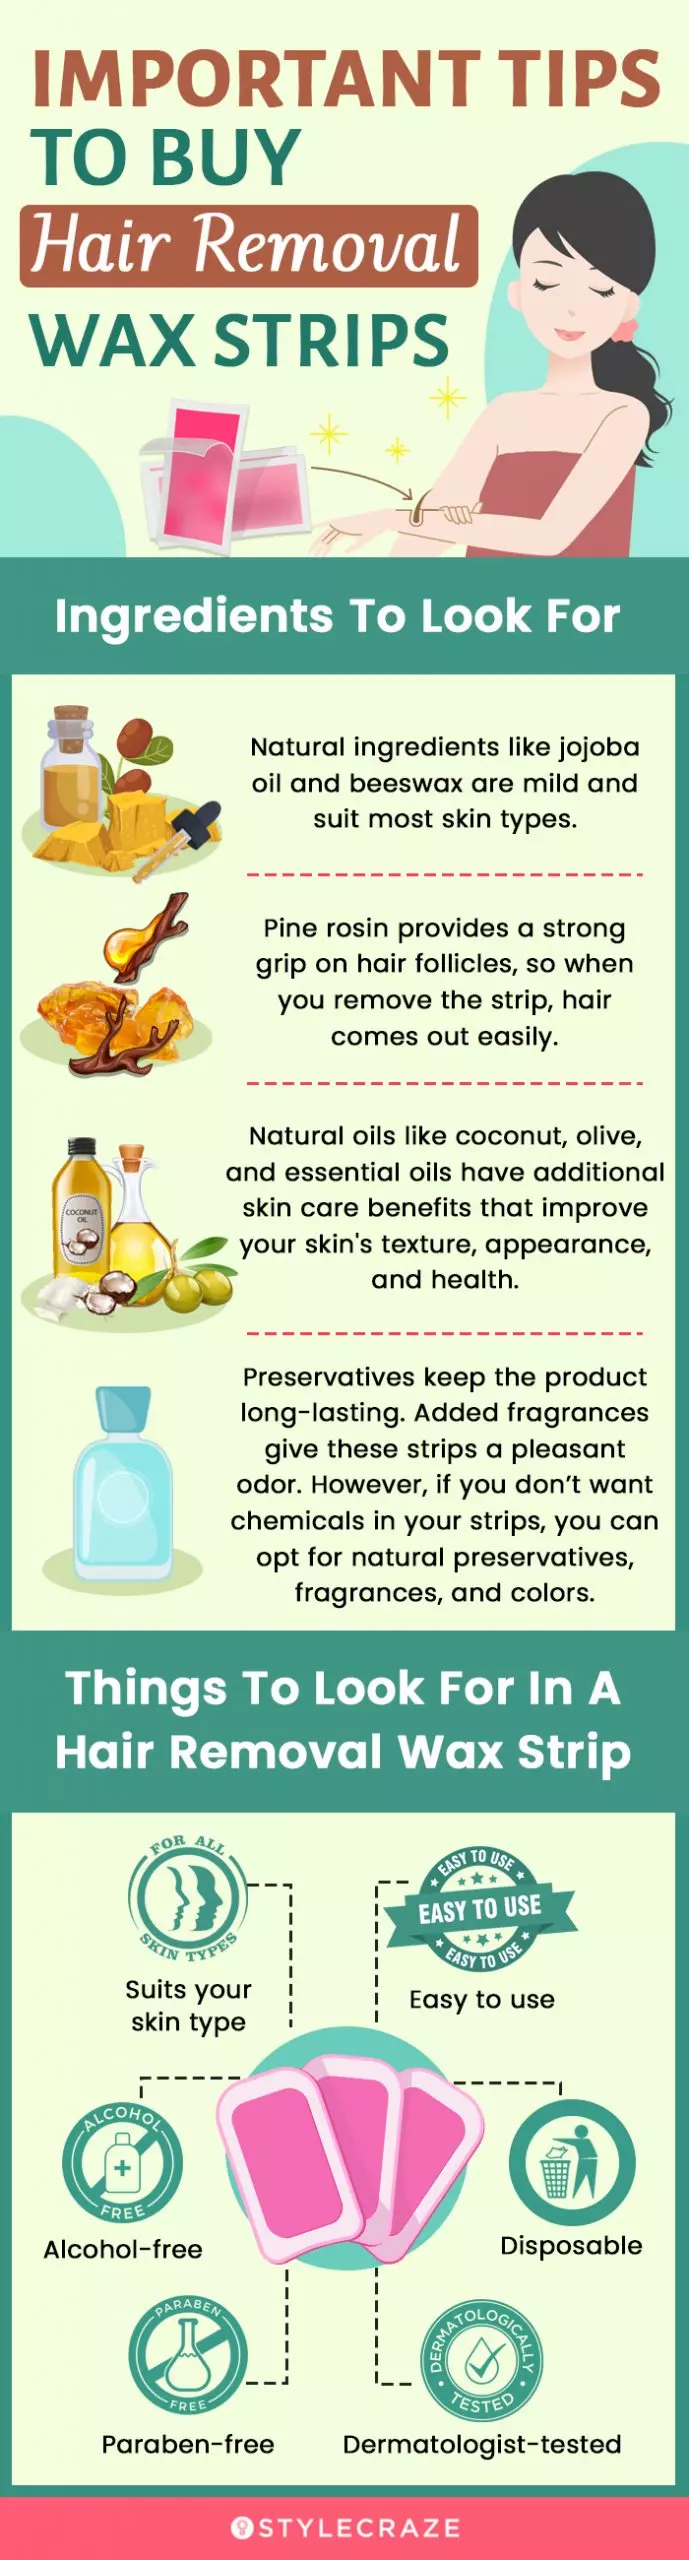 Important Tips To Buy The Best Hair Removal Wax Strips (infographic)